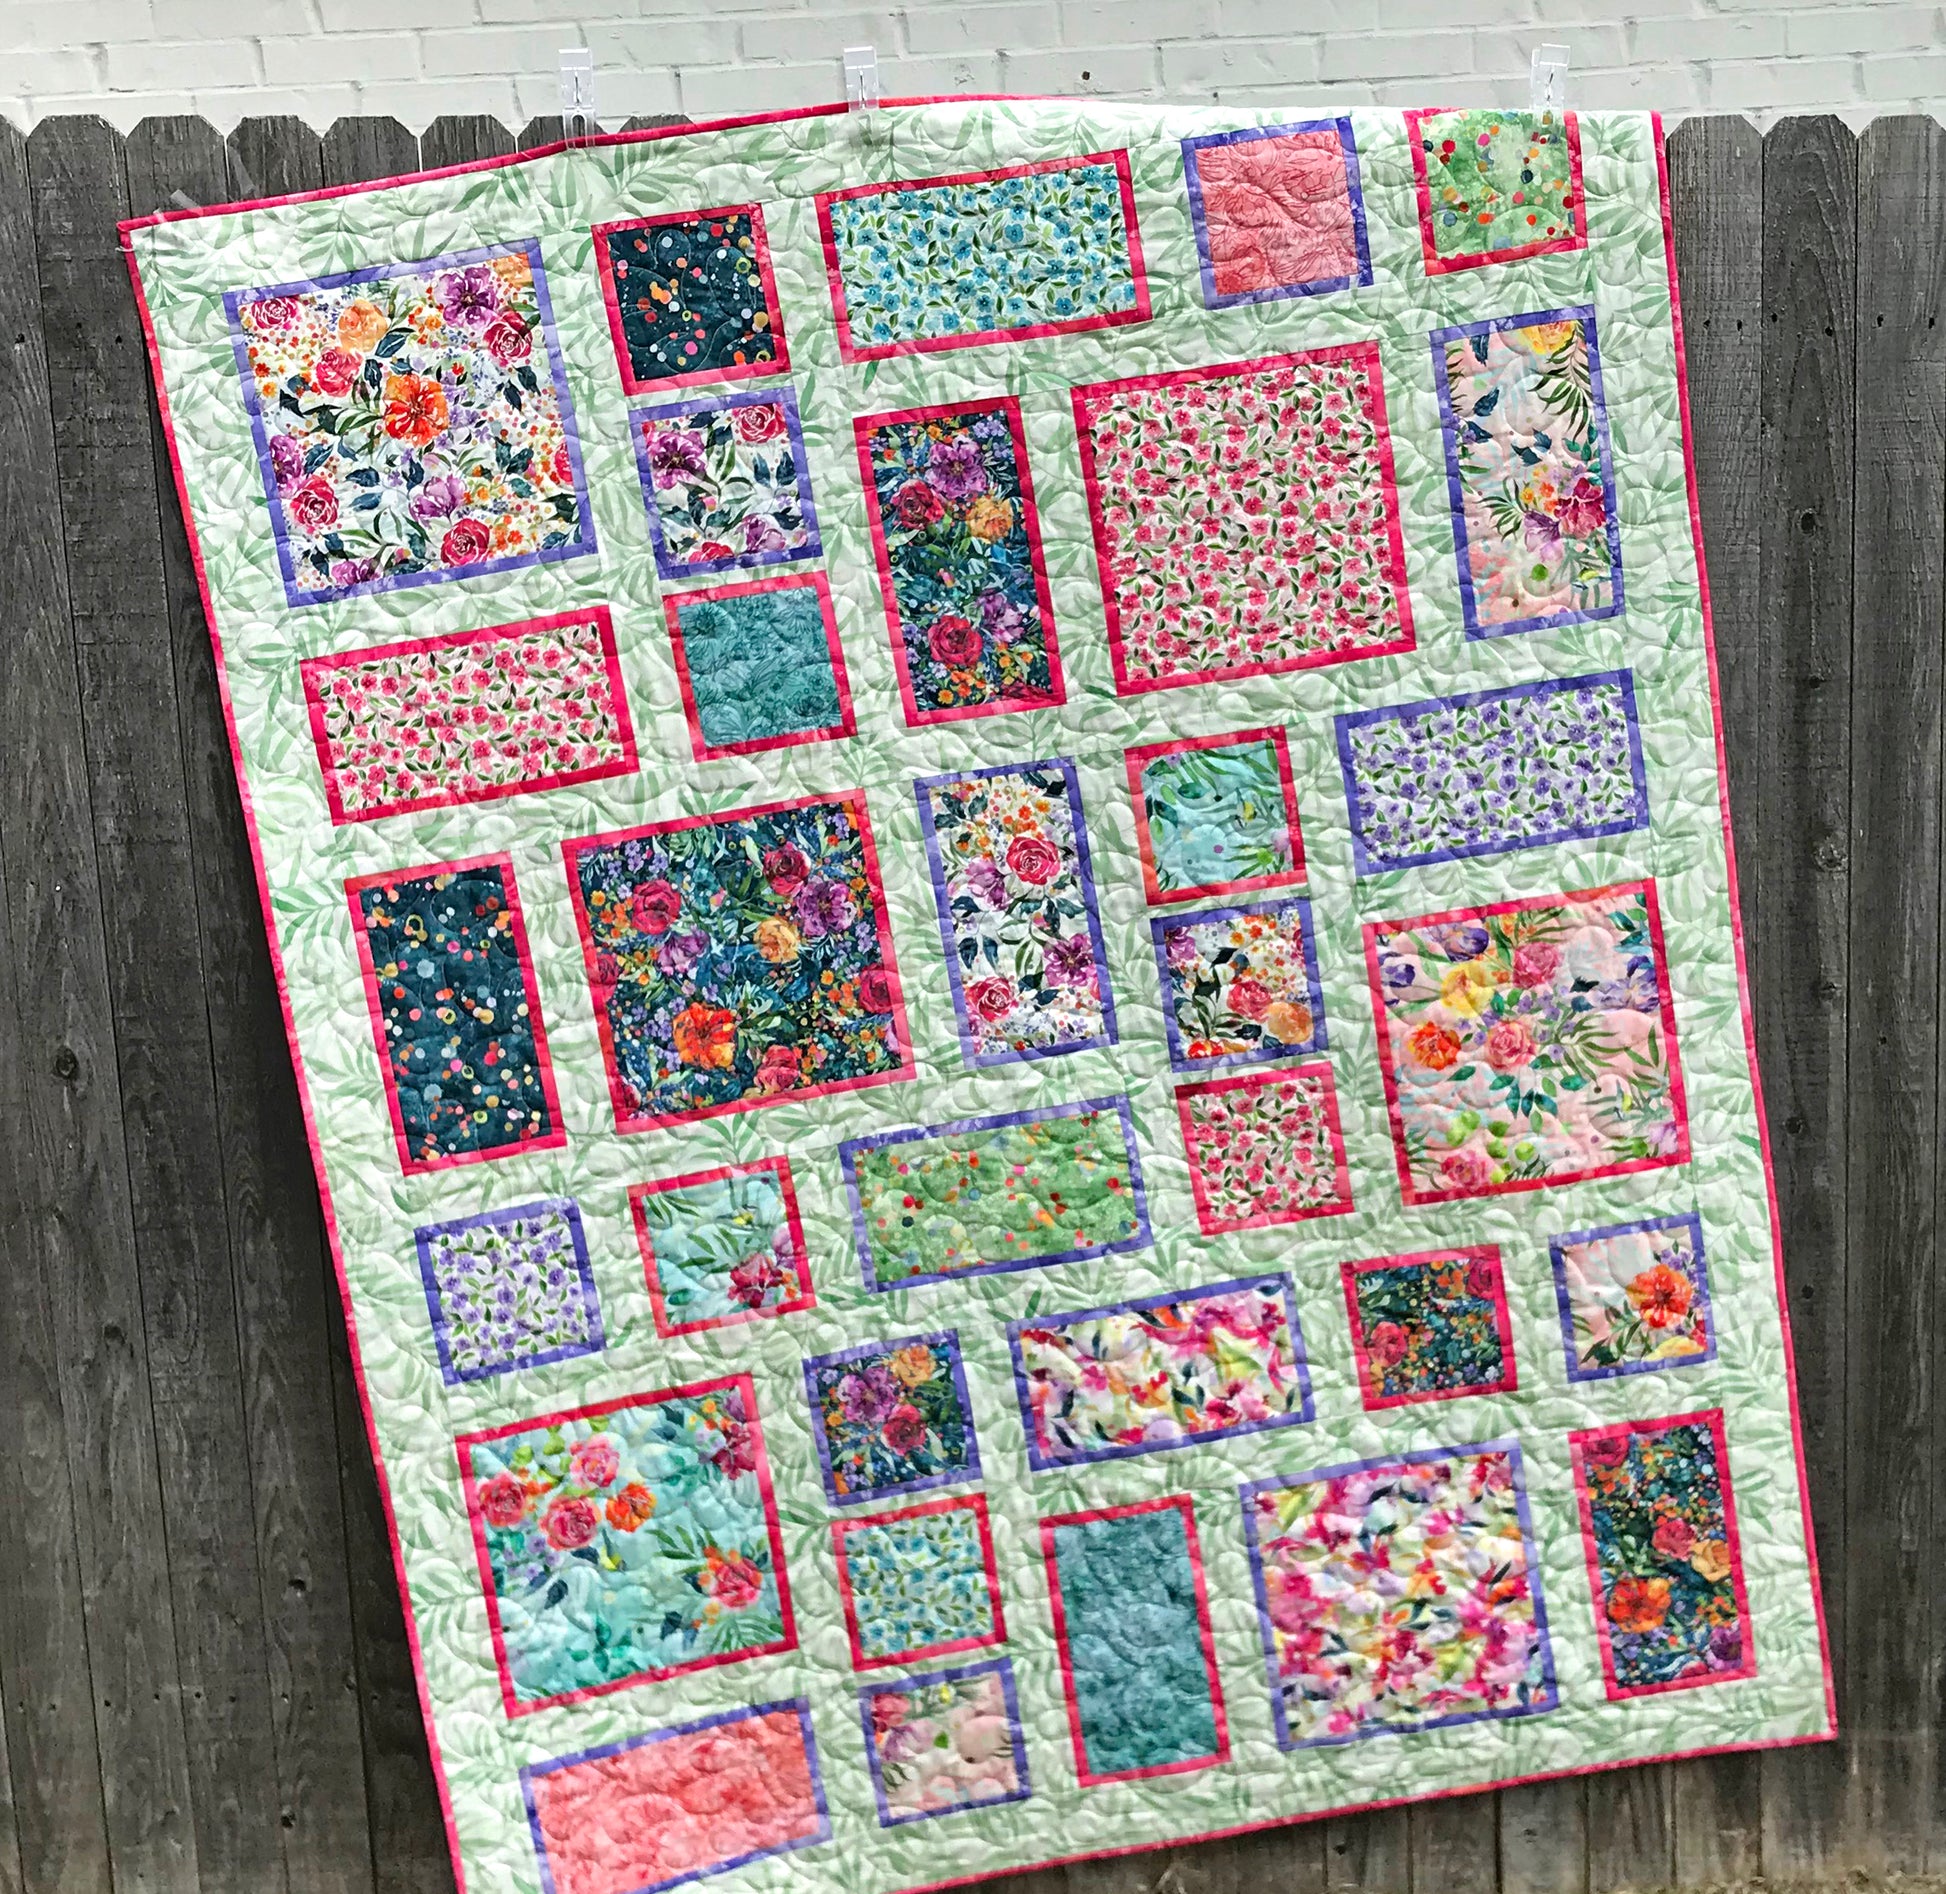 Handmade quilt featuring watercolor floral squares and rectangles framed with pink and purple fabric on a light green background. Quilt is shown hanging on a fence.